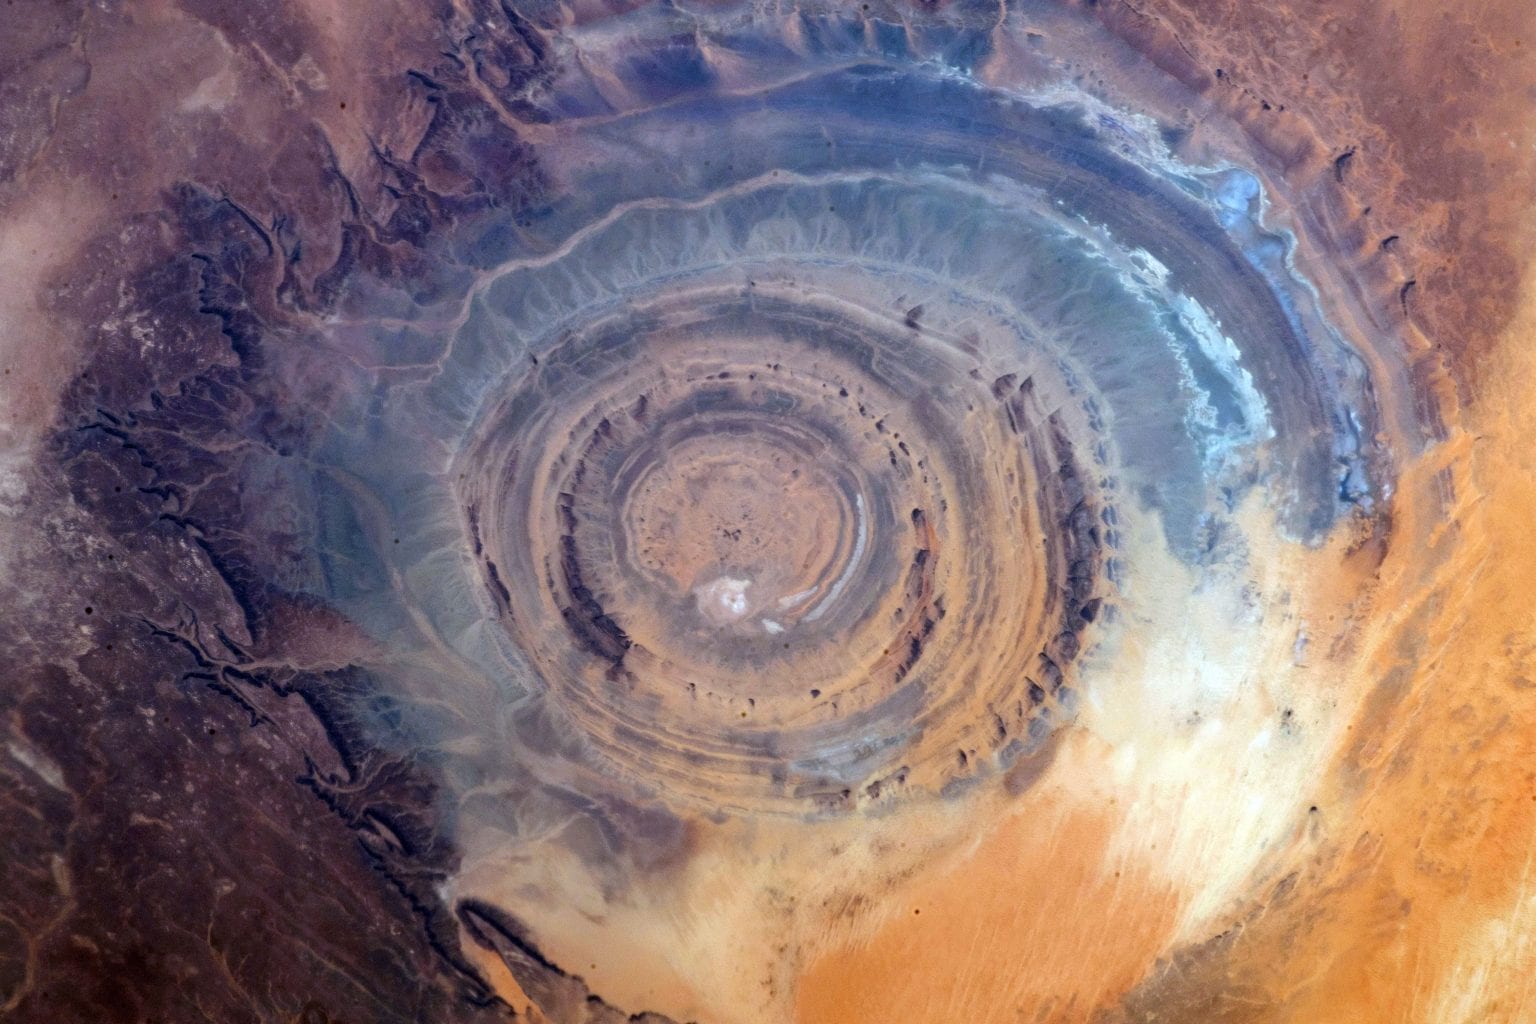 Another fascinating shot of the Eye of Sahara from space. Credit: NASA/JPL-Caltech 